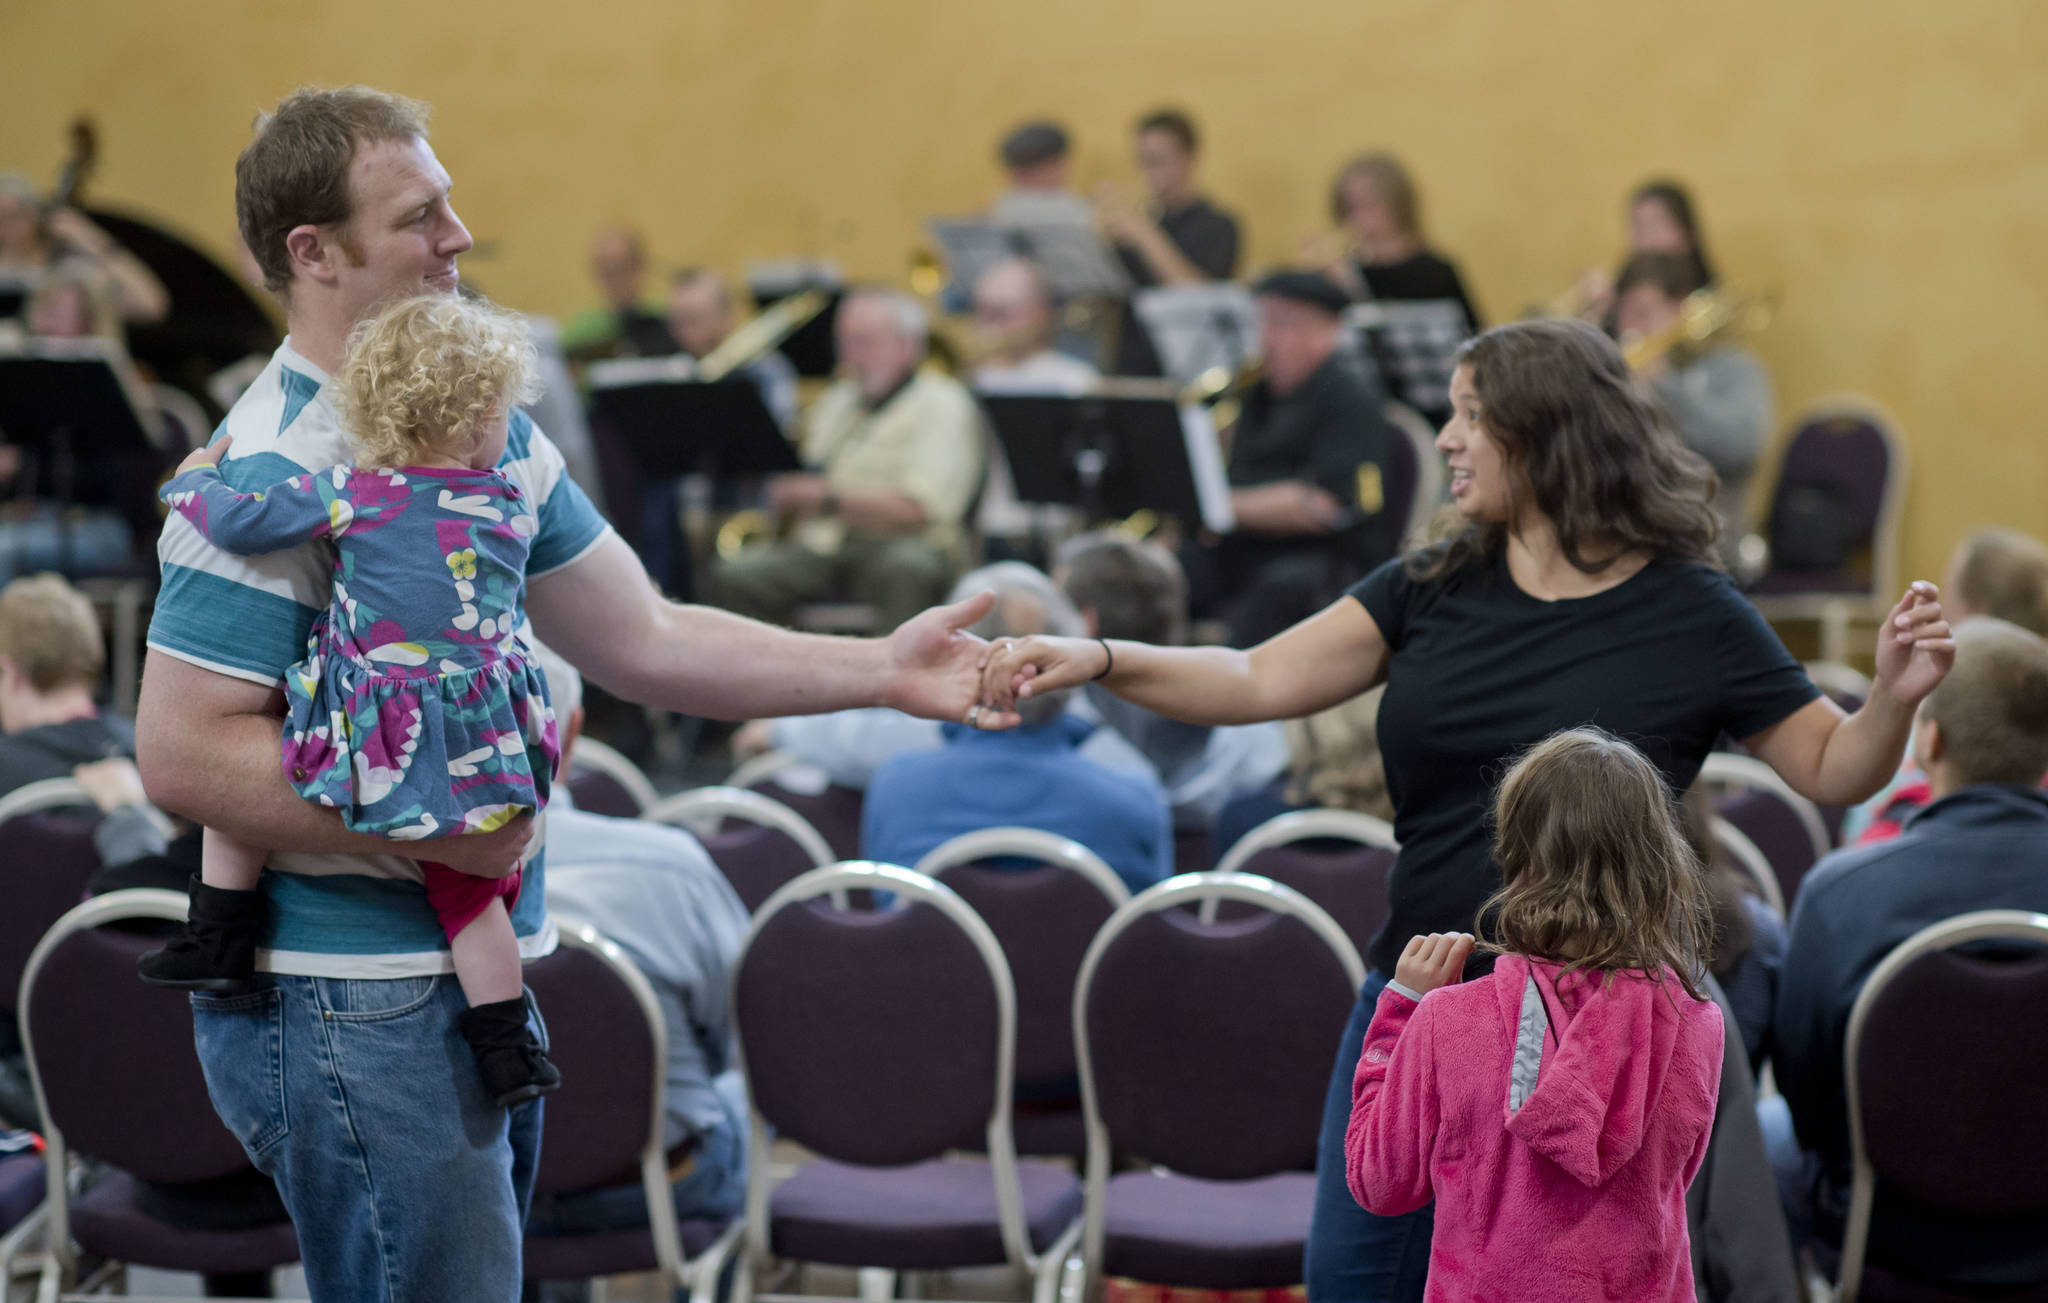 Emily Lockie dances with her husband, Scott, and their children, Eava and Annalise, during the Block Party at the Juneau Arts & Culture Center on Friday, June 15, 2018. (Michael Penn | Juneau Empire)